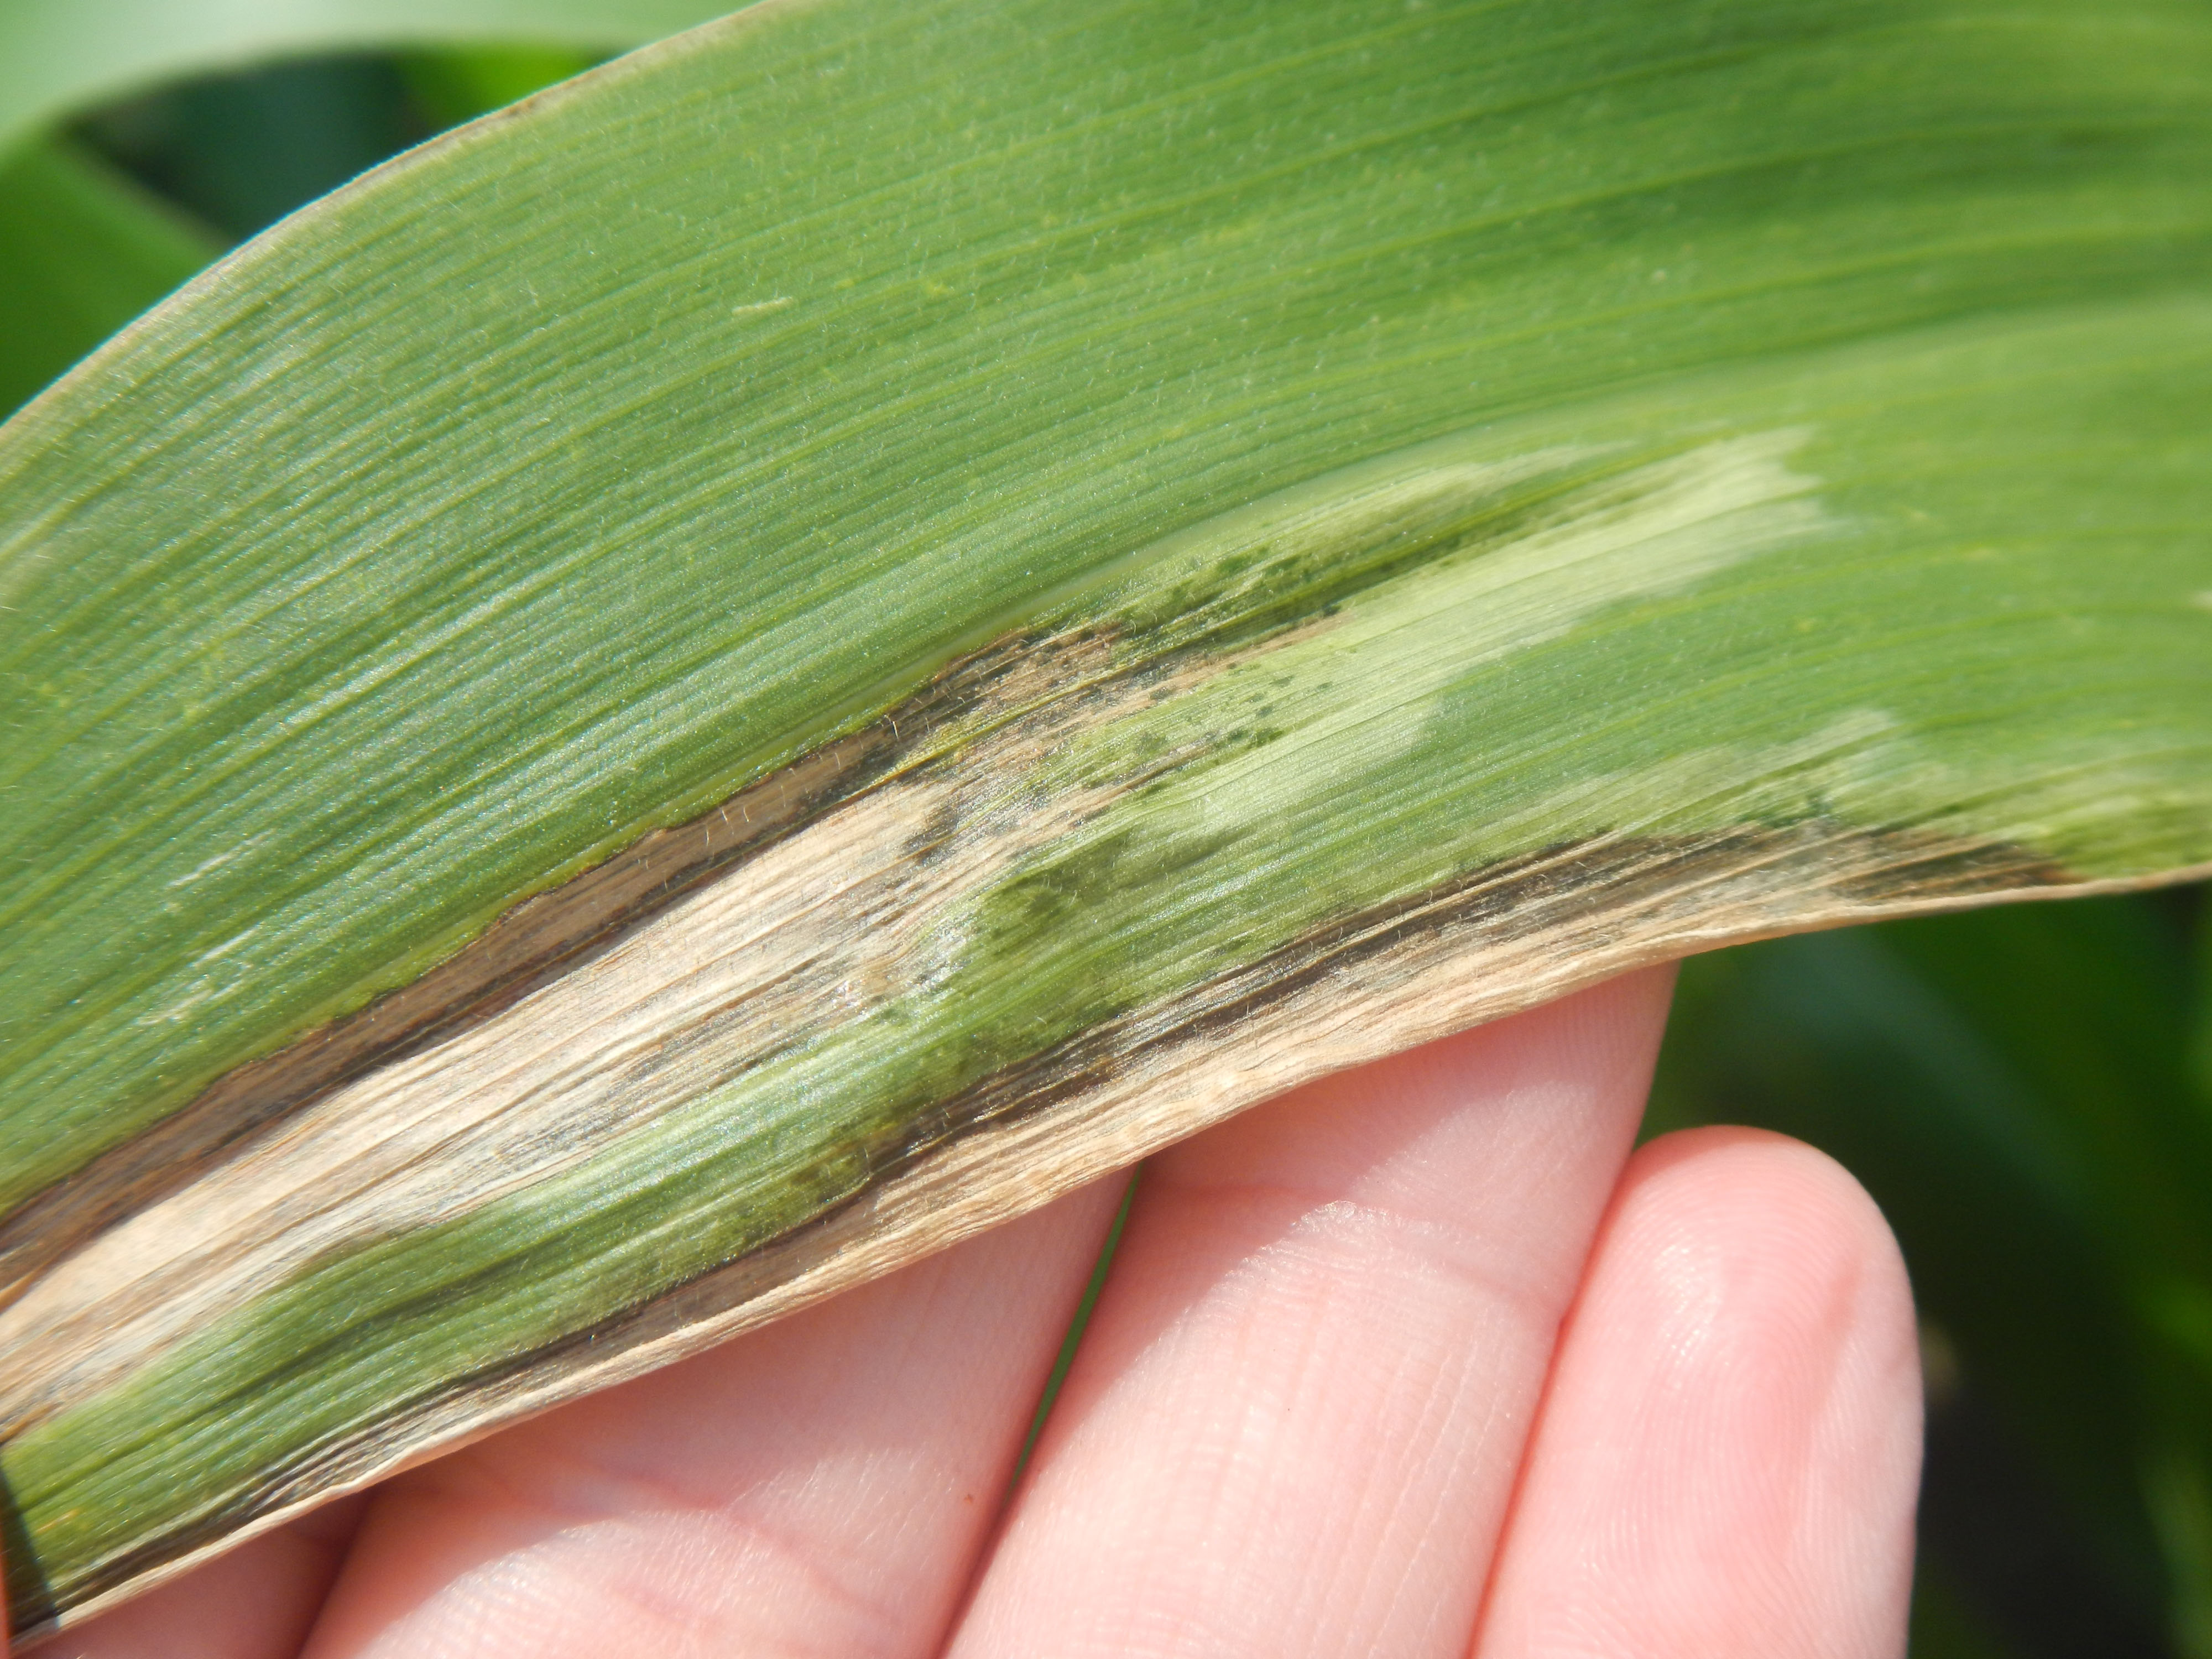 Figure 2: Diagnostic symptoms of Goss’s wilt include water-soaked lesions with black “freckles” or specks on or surrounding the lesions